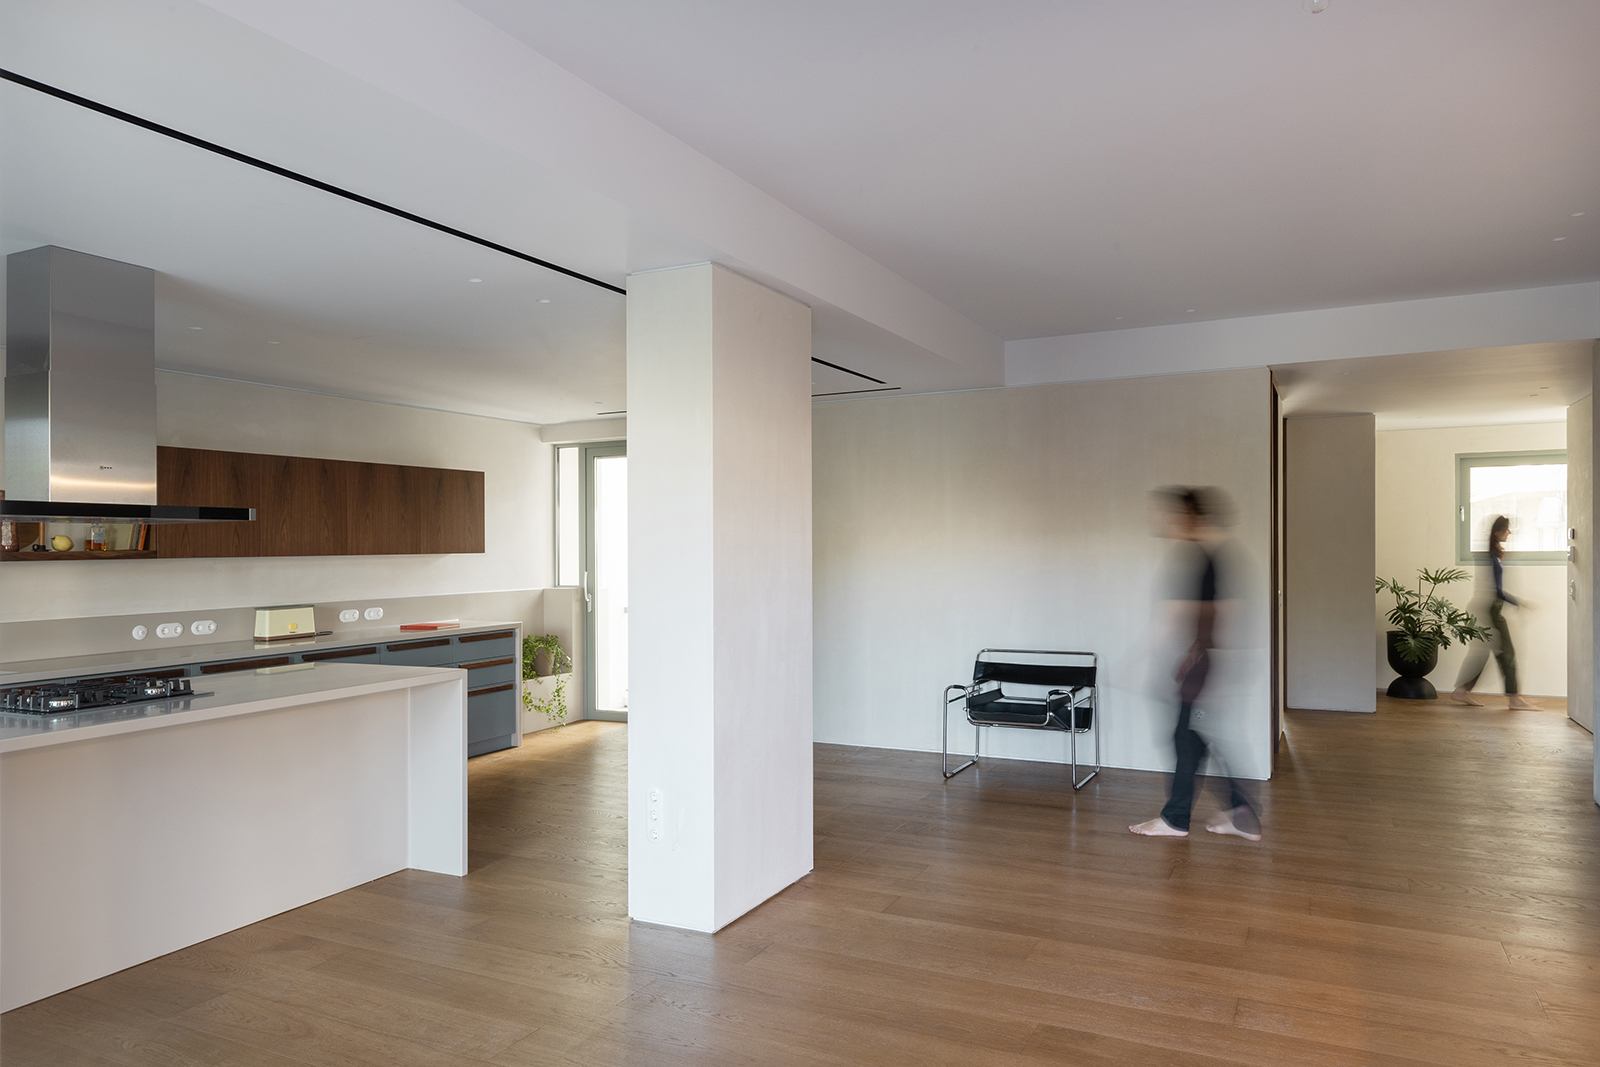 Archisearch Apartment M3 renovation in Kolonaki, Athens | 4k architects in cooperation with Studio Taf